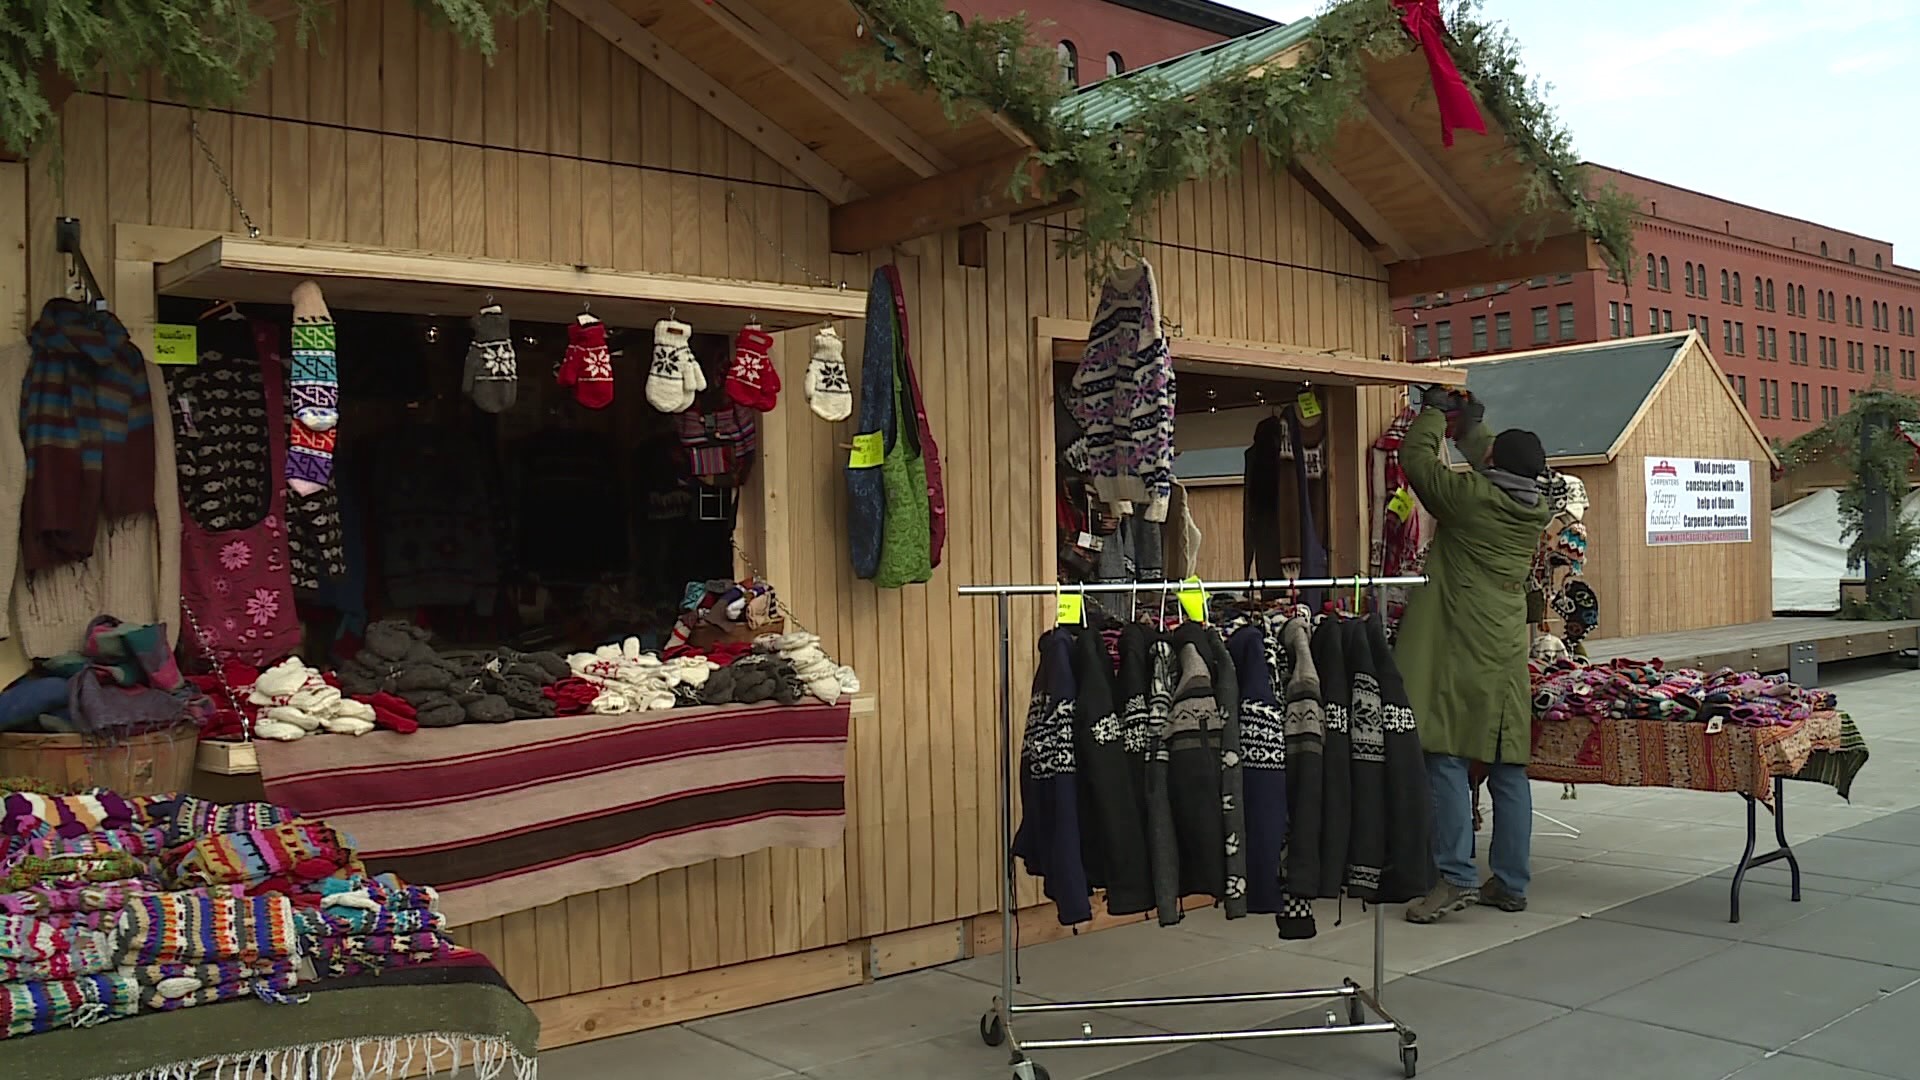 The event is modeled on the open-air Christkindl markets found in European countries like Austria and Germany.